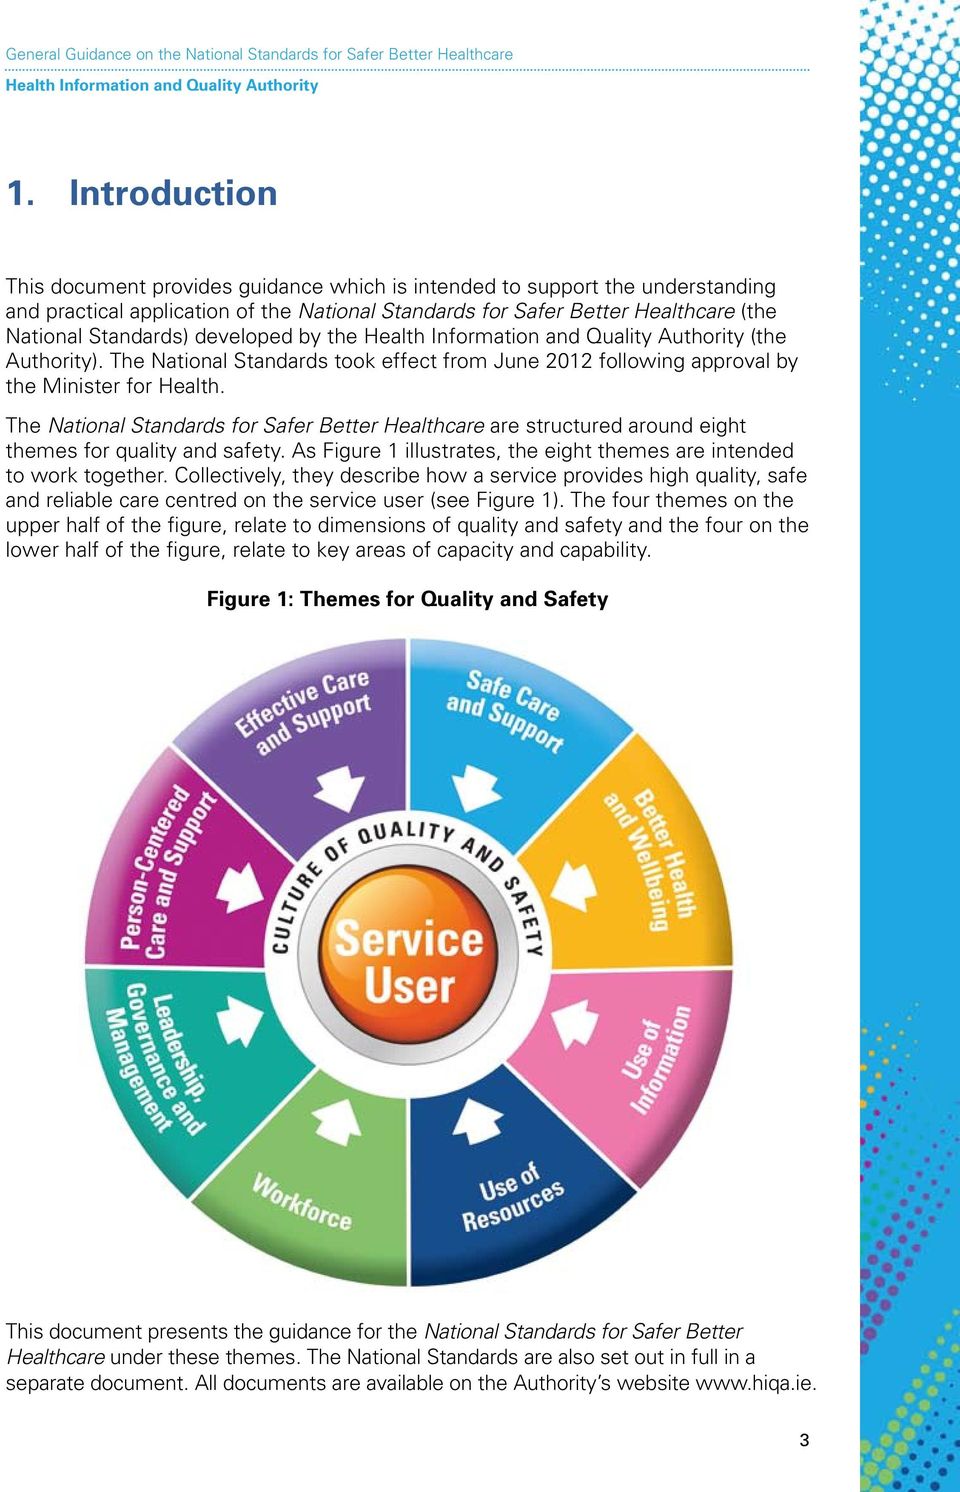 The National Standards for Safer Better Healthcare are structured around eight themes for quality and safety. As Figure 1 illustrates, the eight themes are intended to work together.